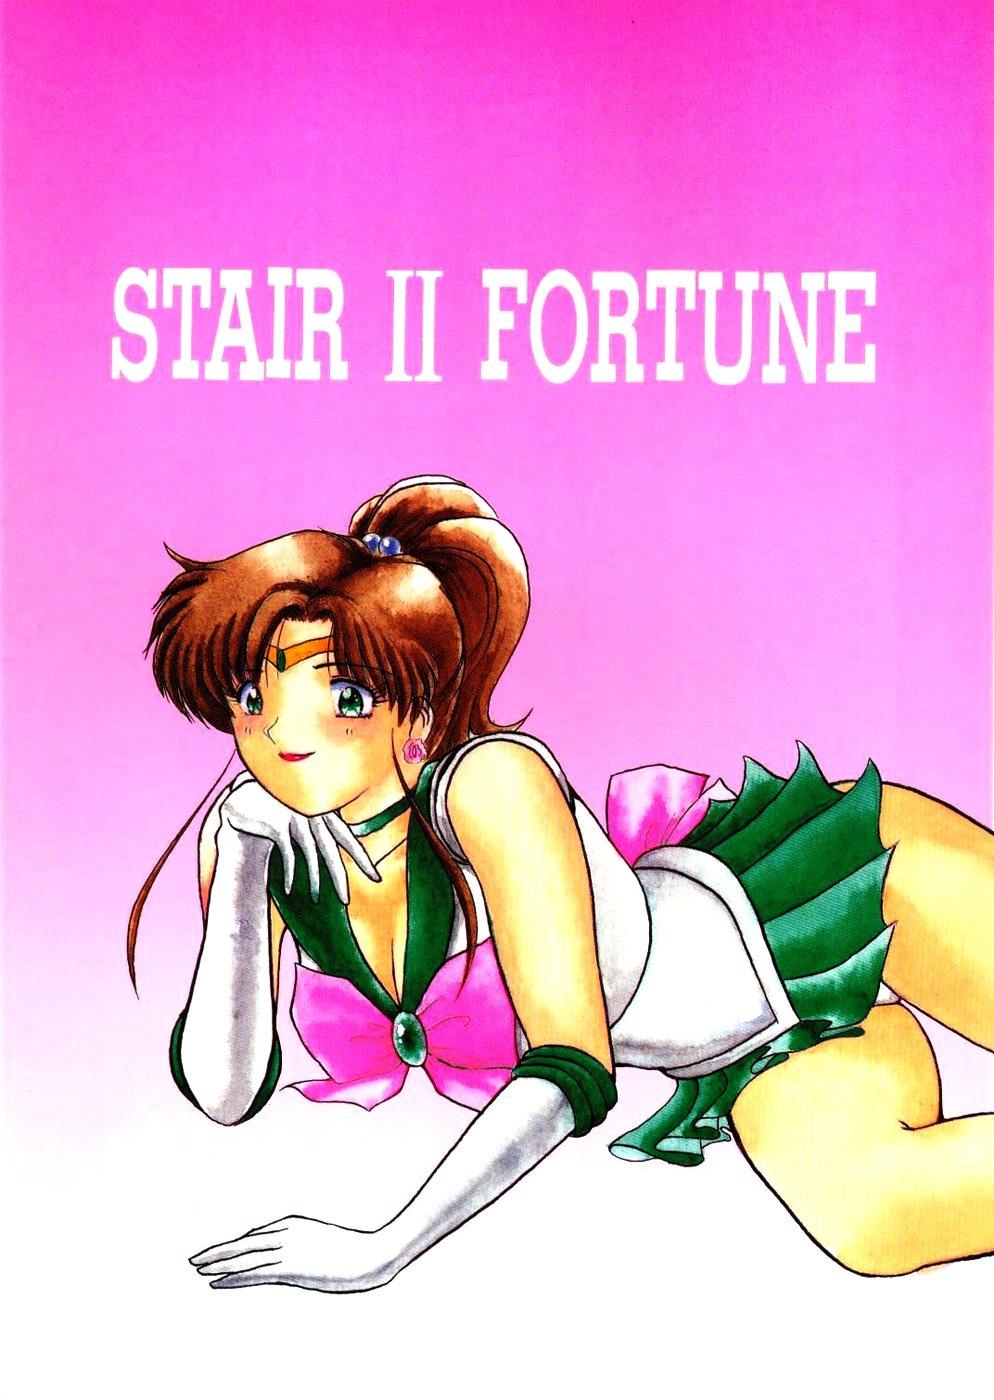 Argentino STAIR II FORTUNE - Sailor moon Boobs - Picture 1